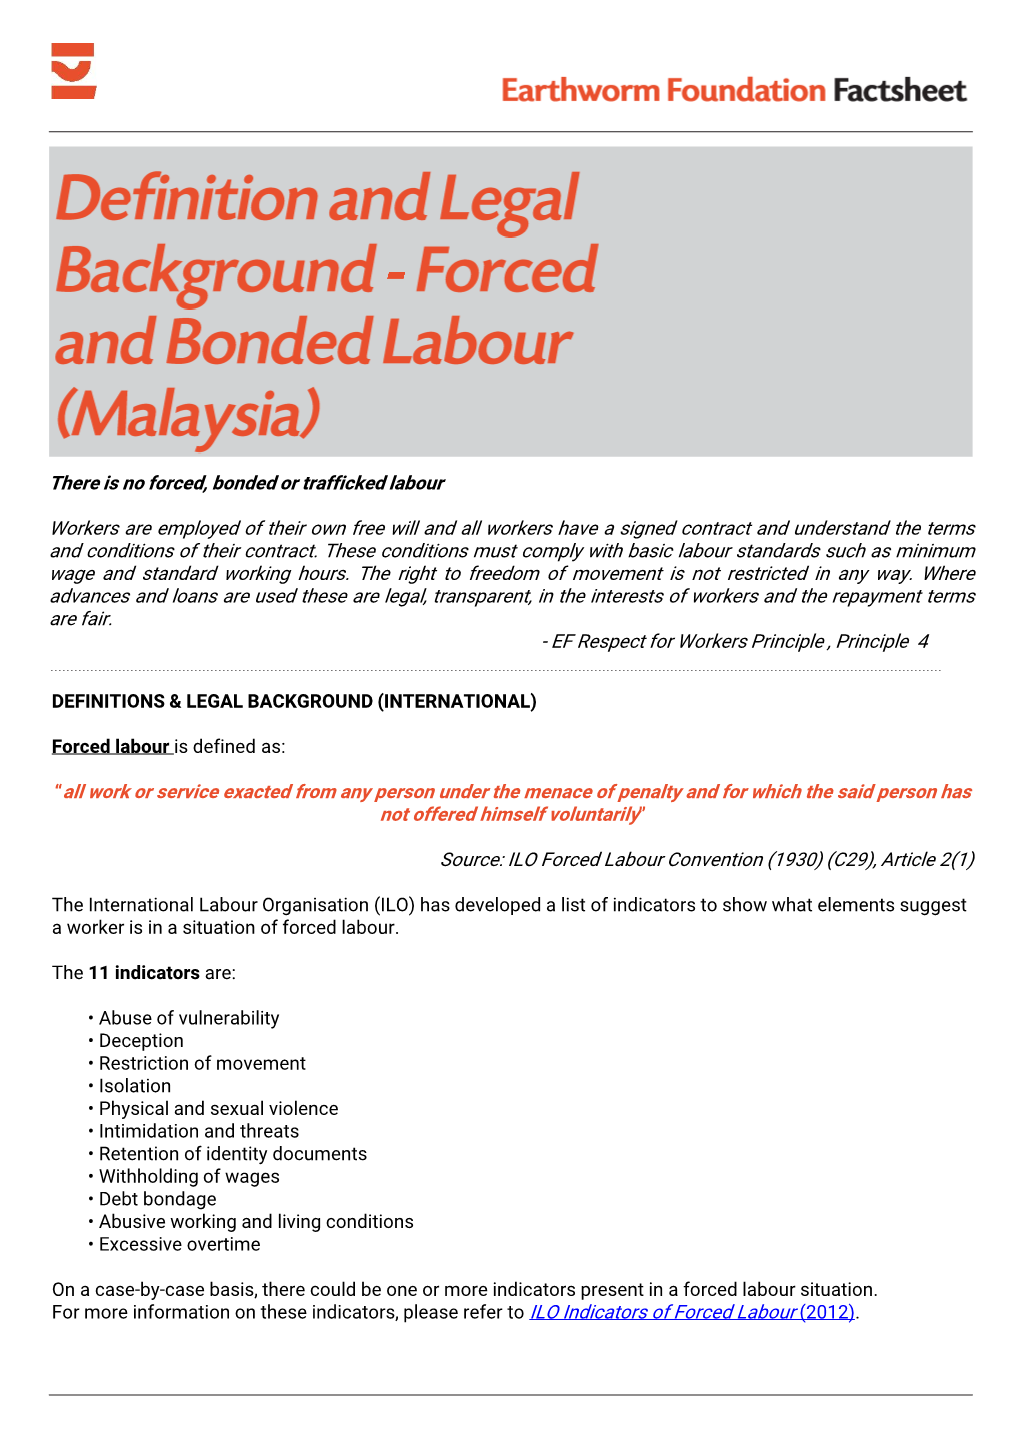 Definition and Legal Background Forced and Bonded Labour